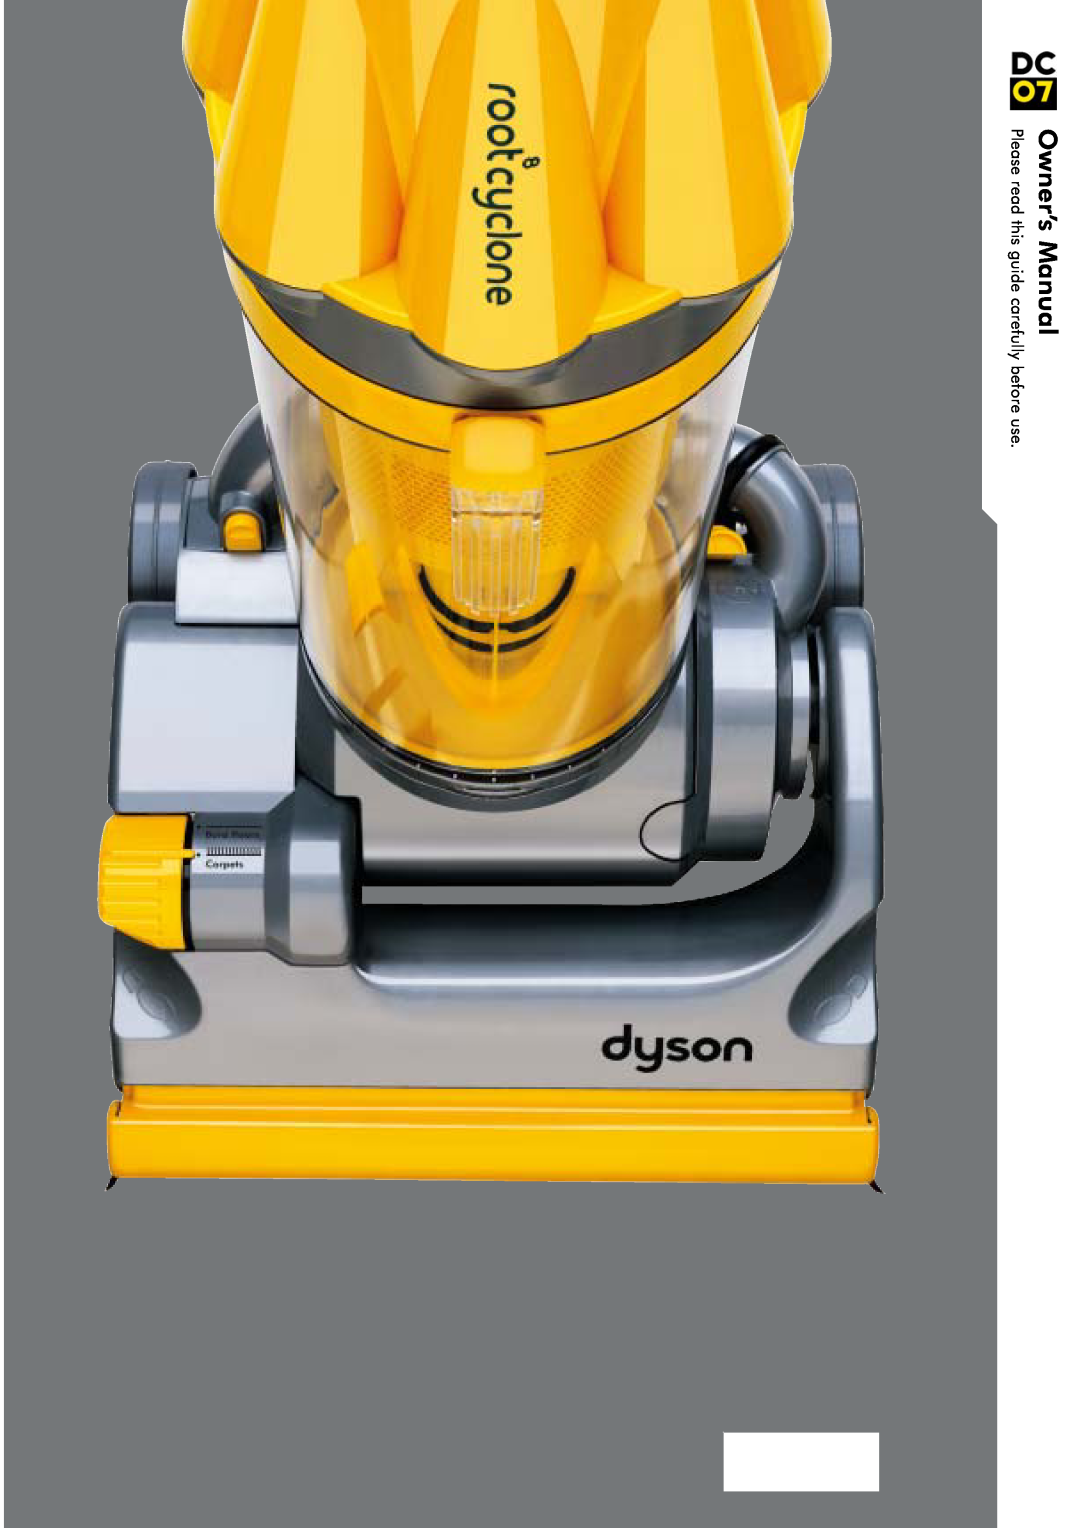 Dyson water filter owner manual Please read this guide carefully before use 